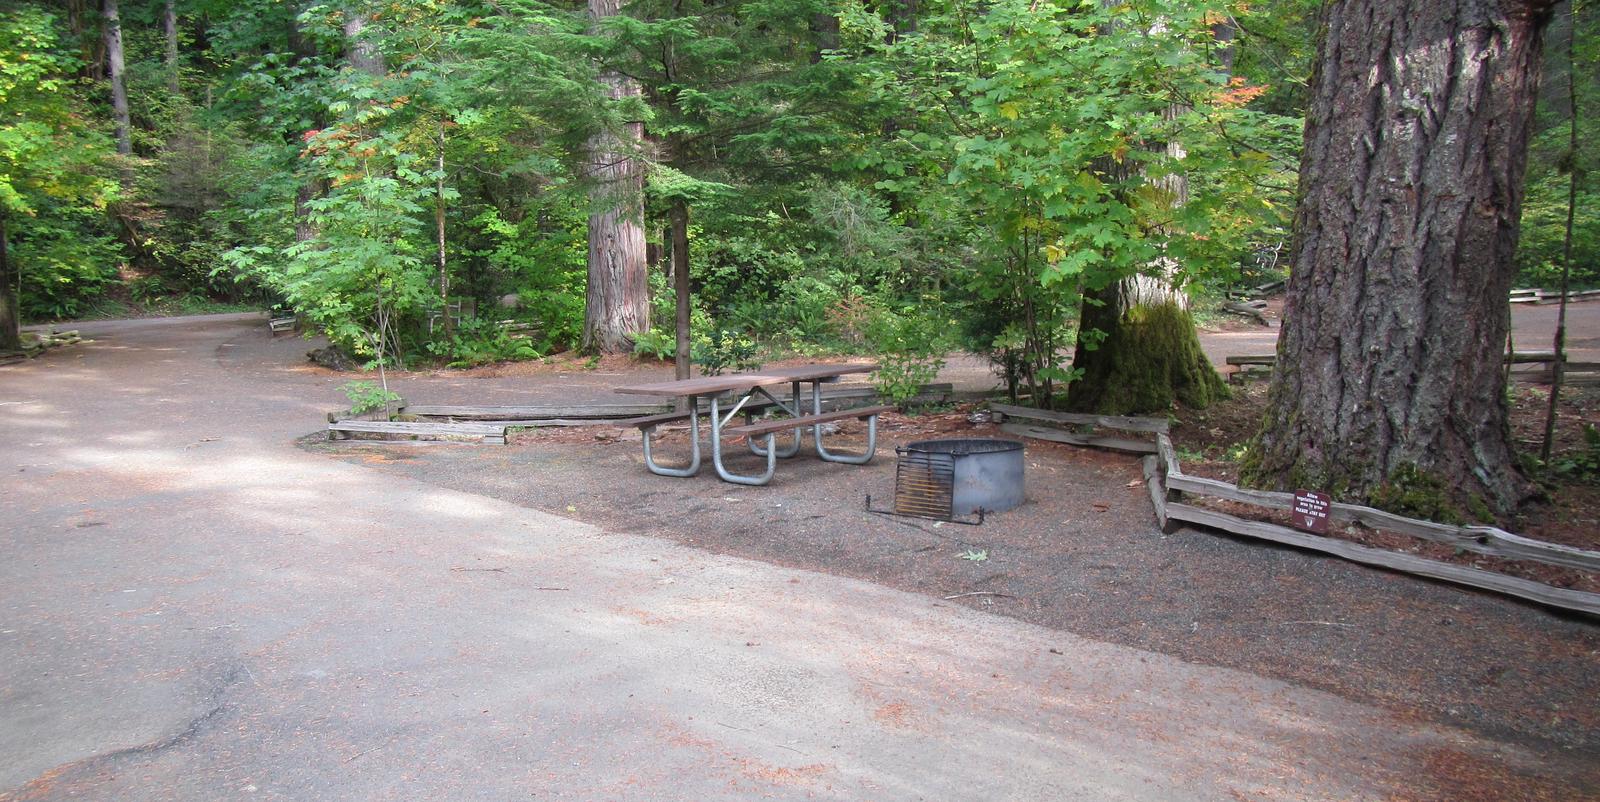 Site includes picnic table and fire ring